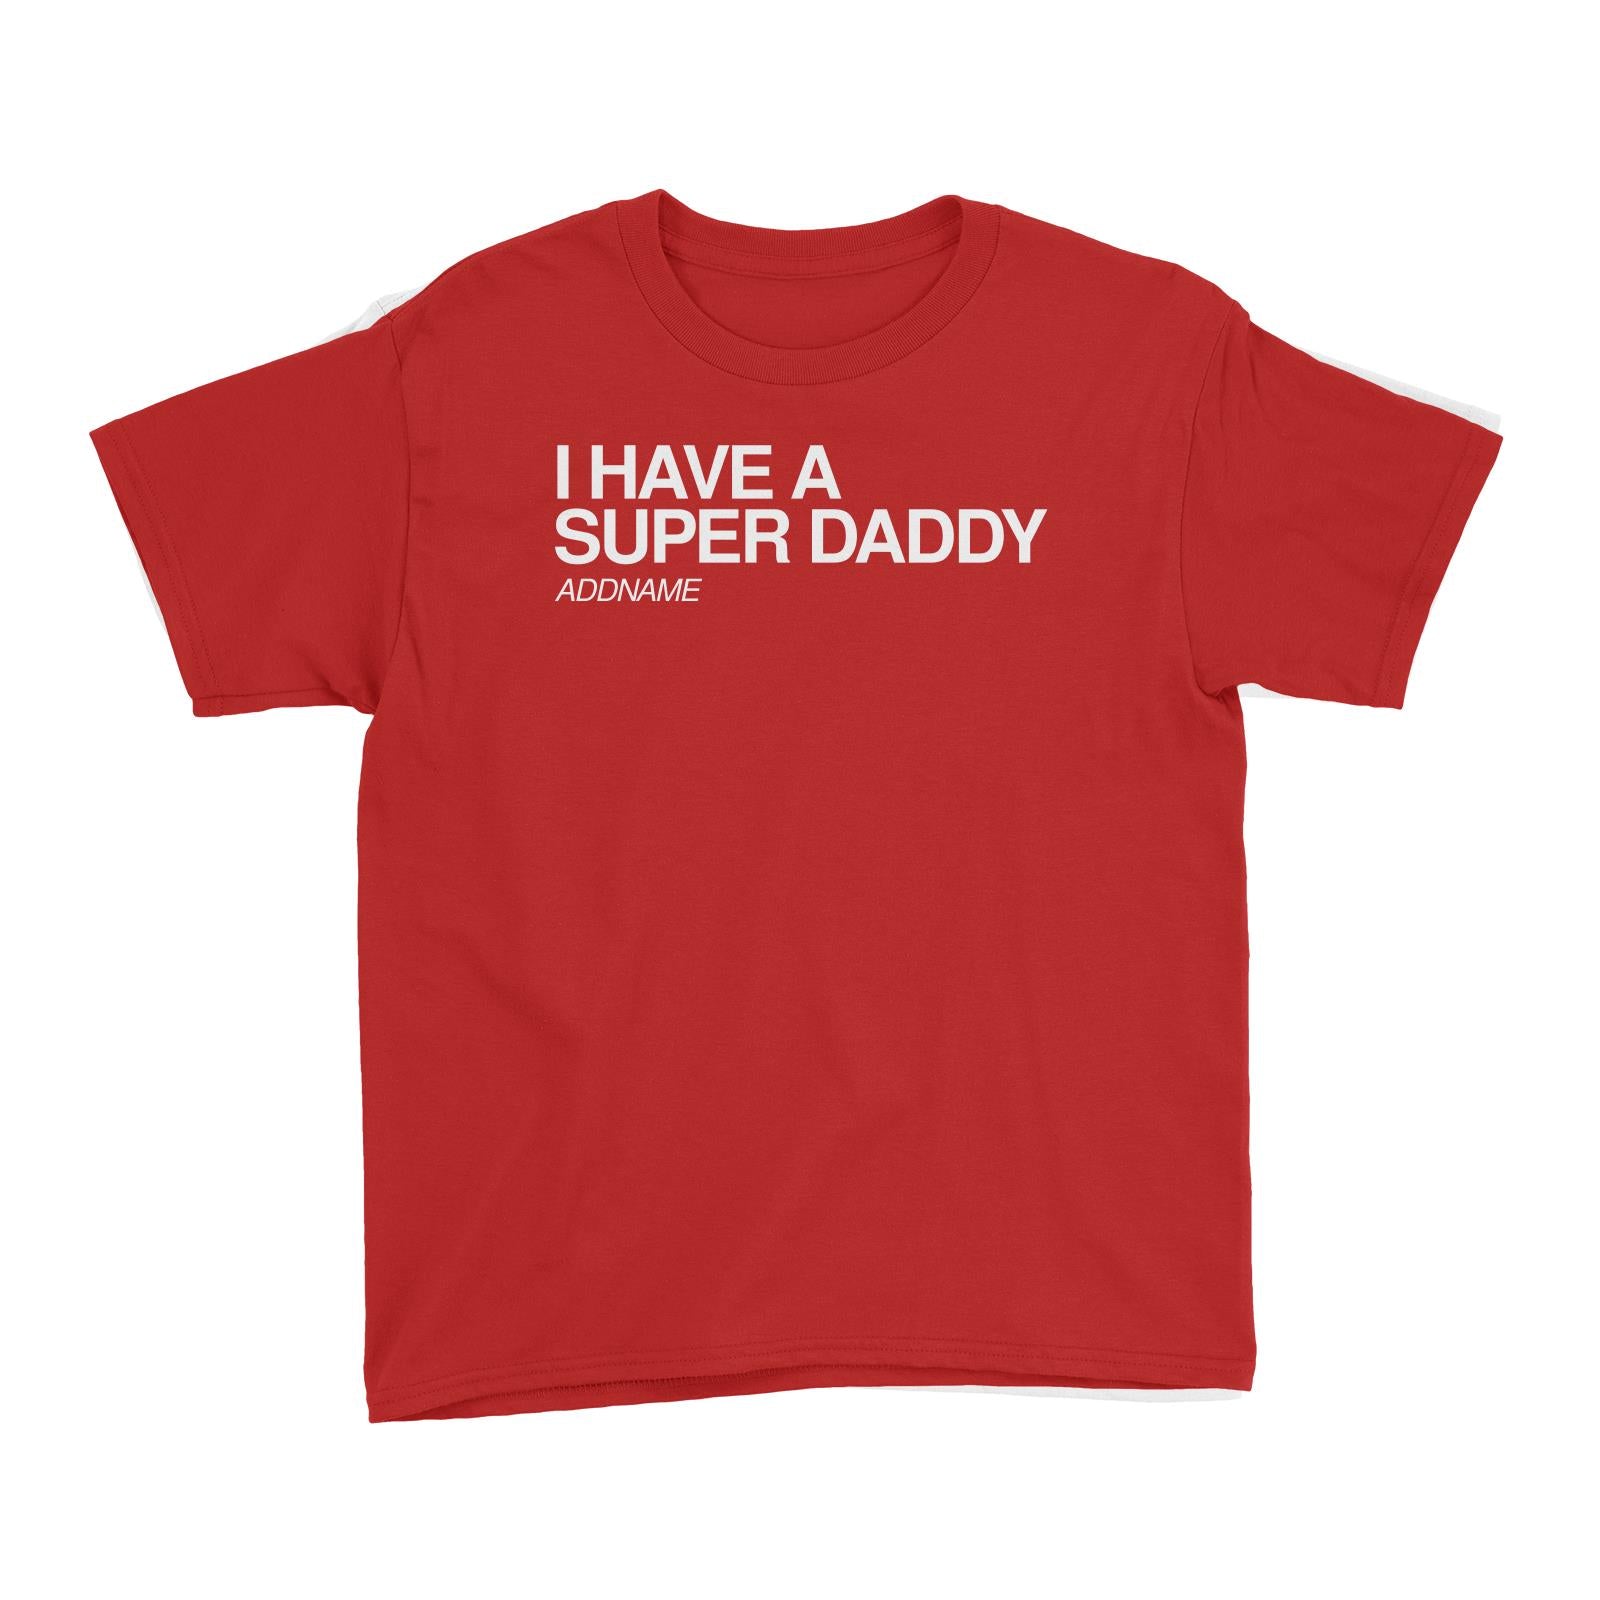 I Have A Super Family I Have A Super Daddy Addname Kid's T-Shirt